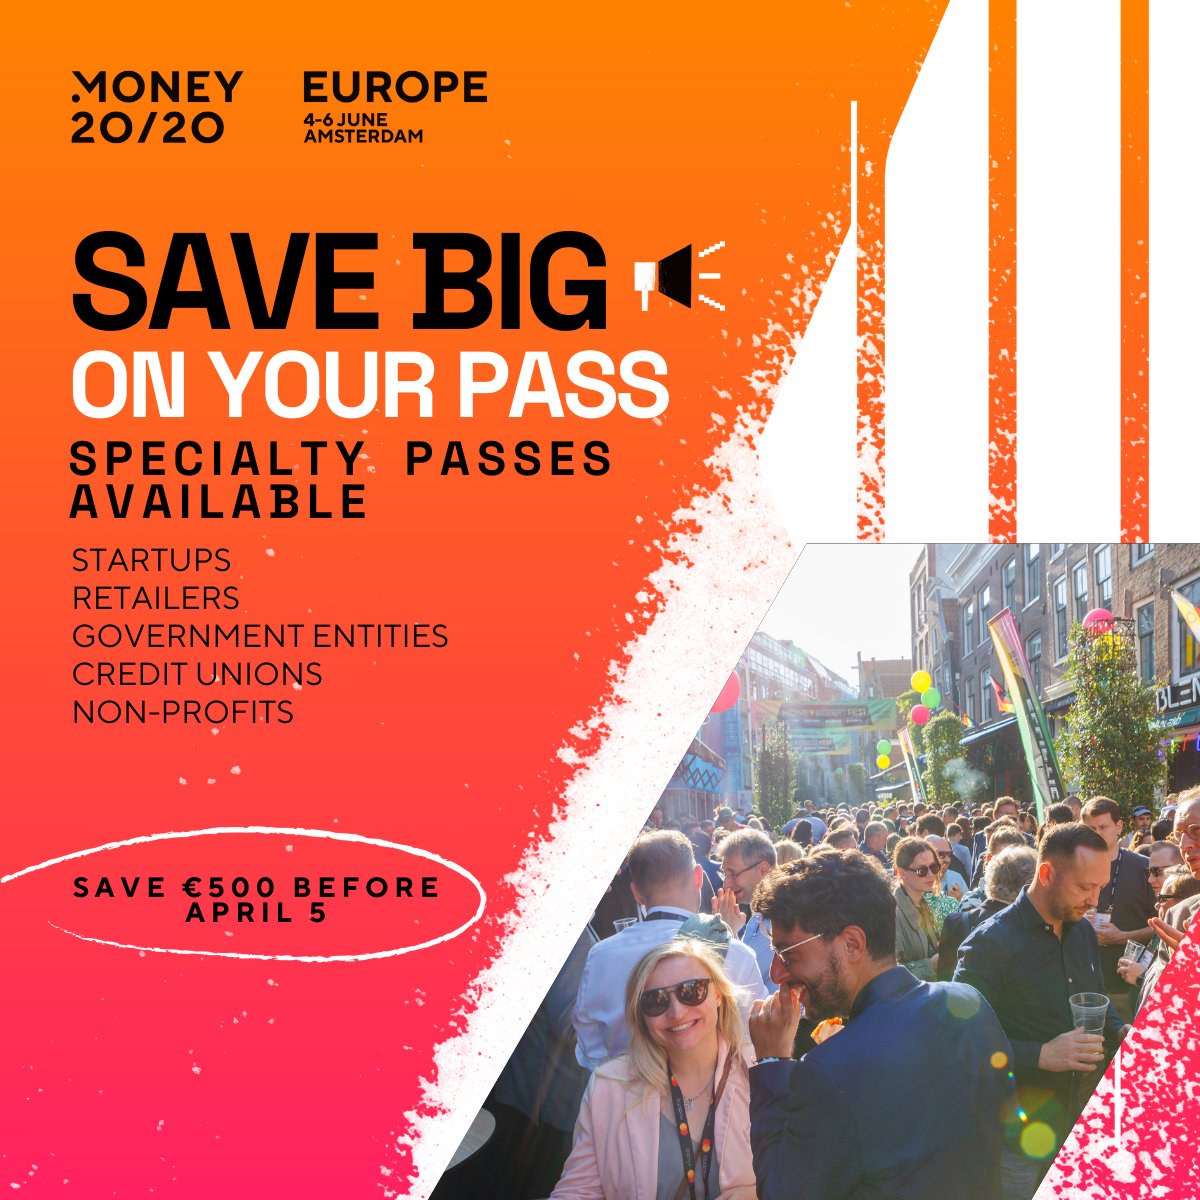 Did you know?! #Money2020EU might have just the pass for you! If you’re a Startup, Retailer, Government entity, credit union, or tax-exempt nonprofit organisation, you can access our specialty passes! Grab it before this Friday, April 5 to save €500: tinyurl.com/y5ettnm2